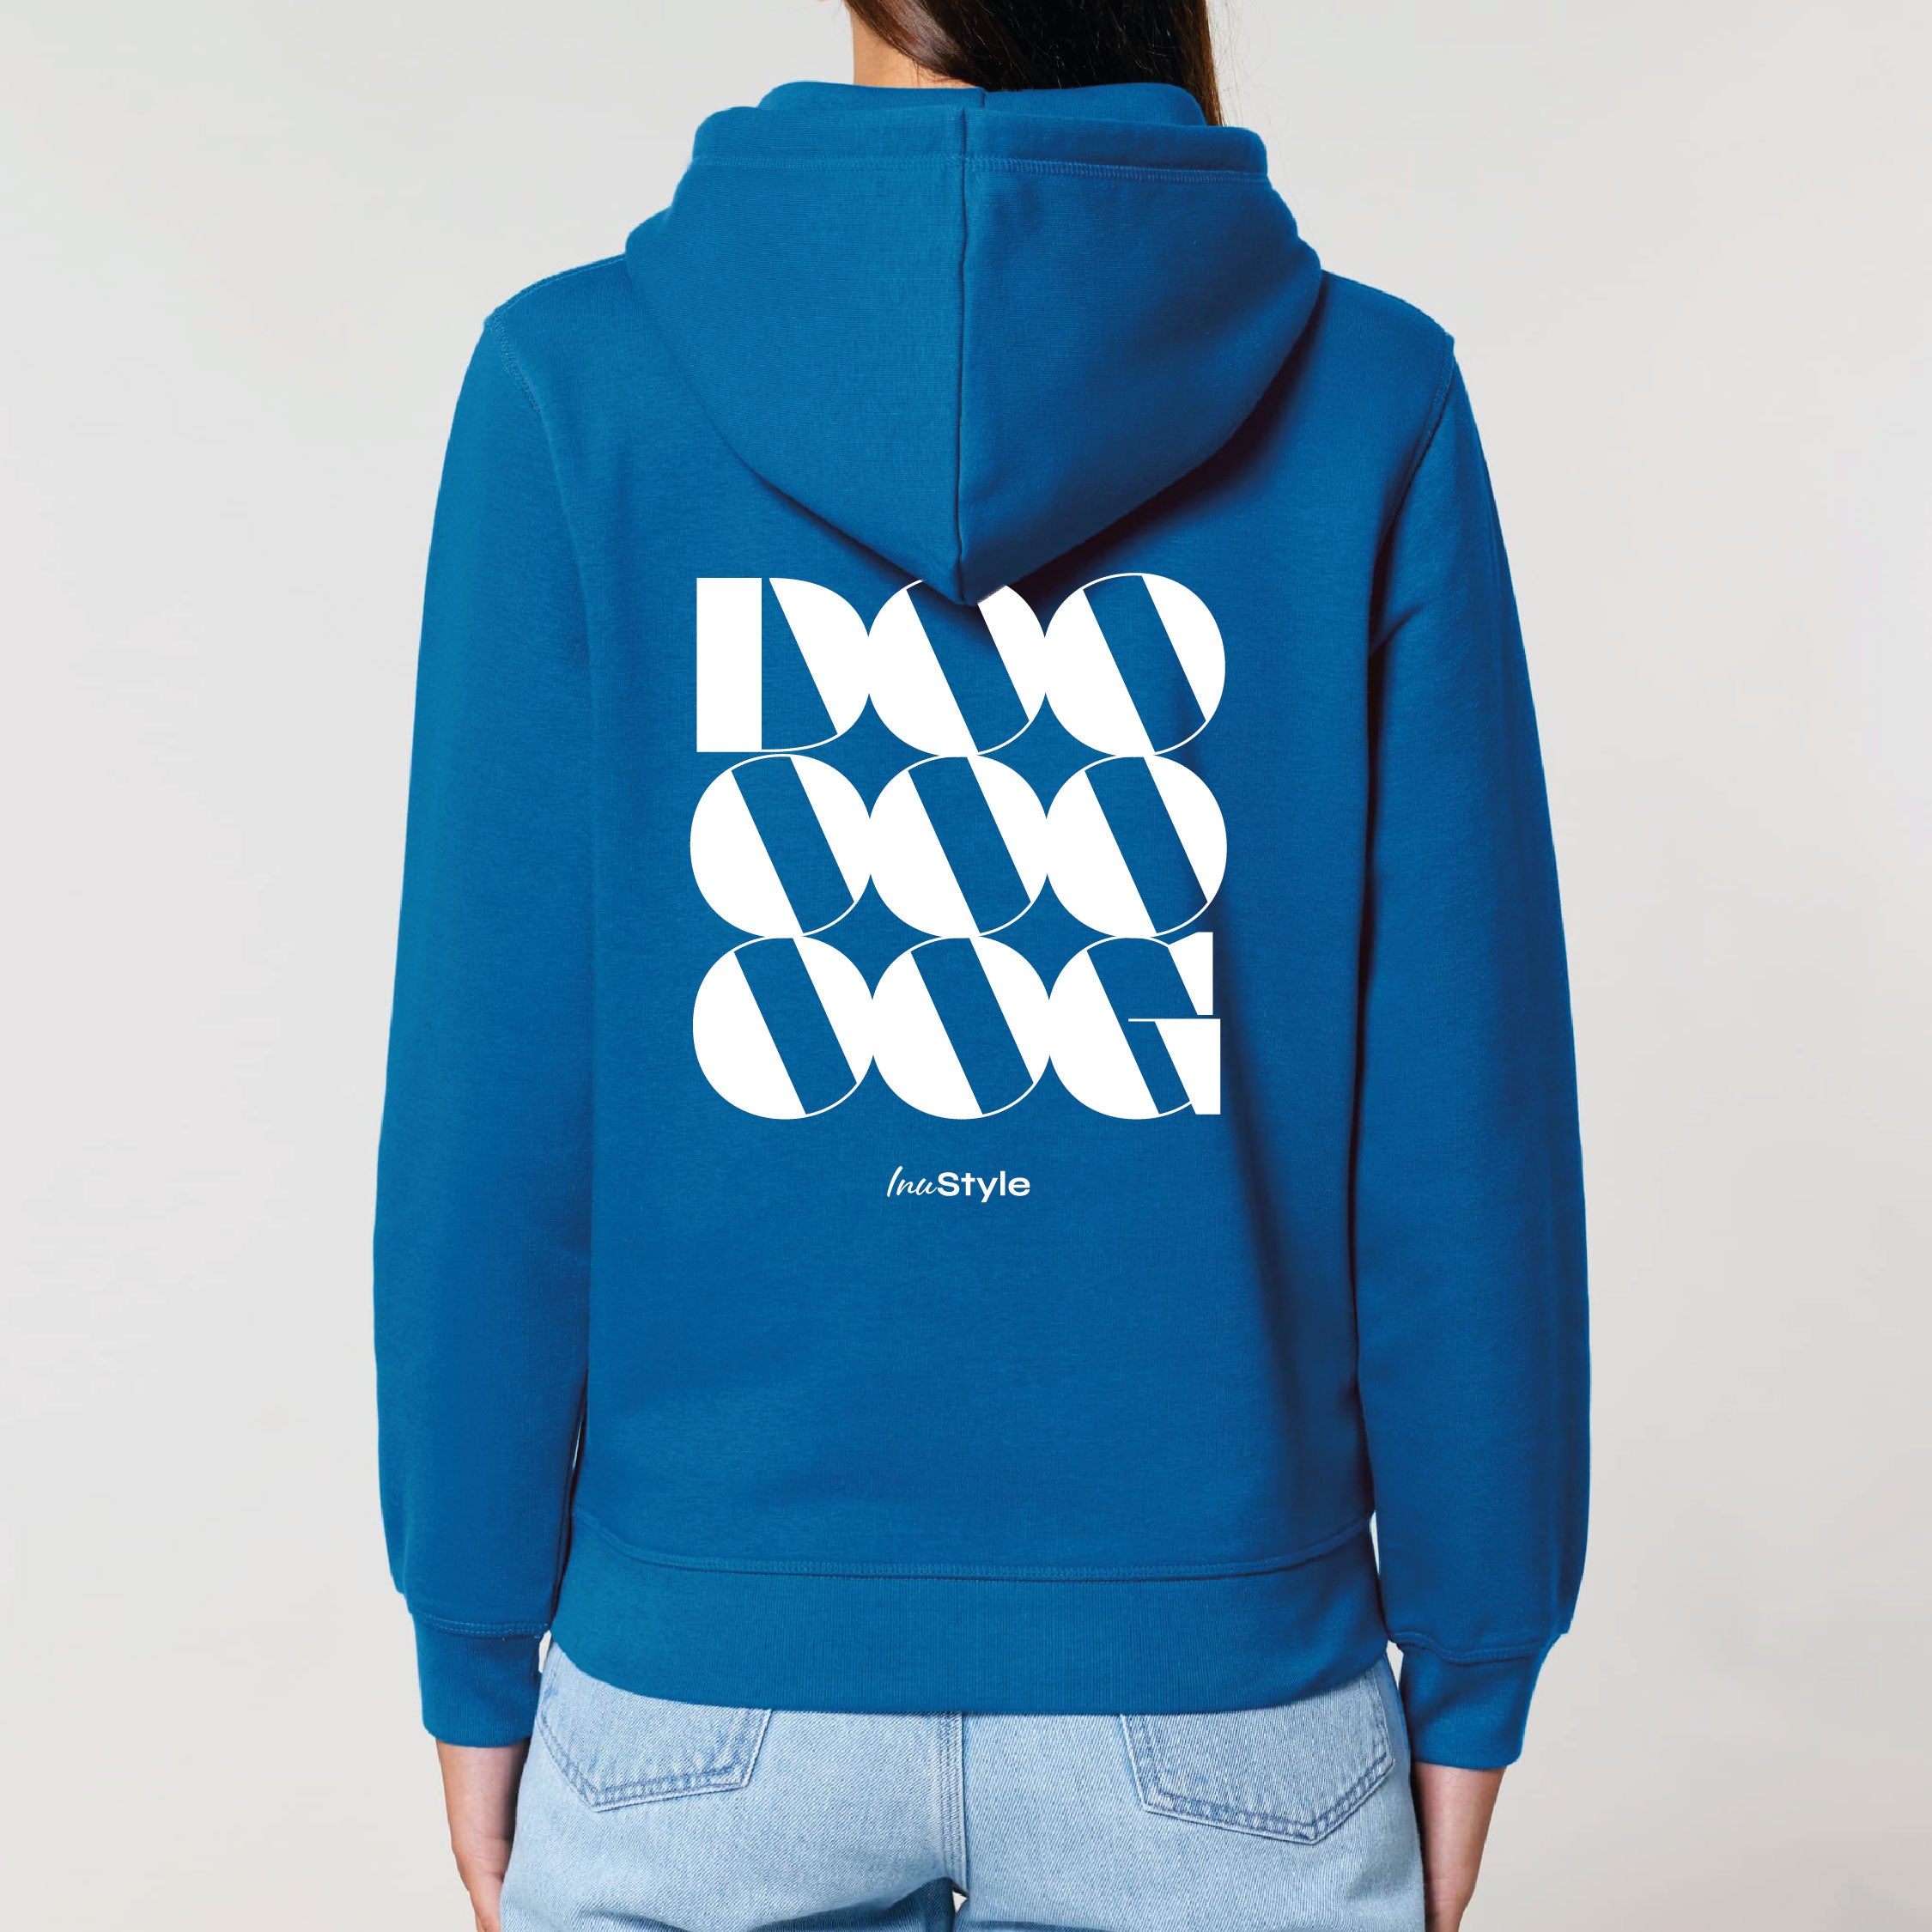 New Inu.style Collection - DOOG - Hoodie